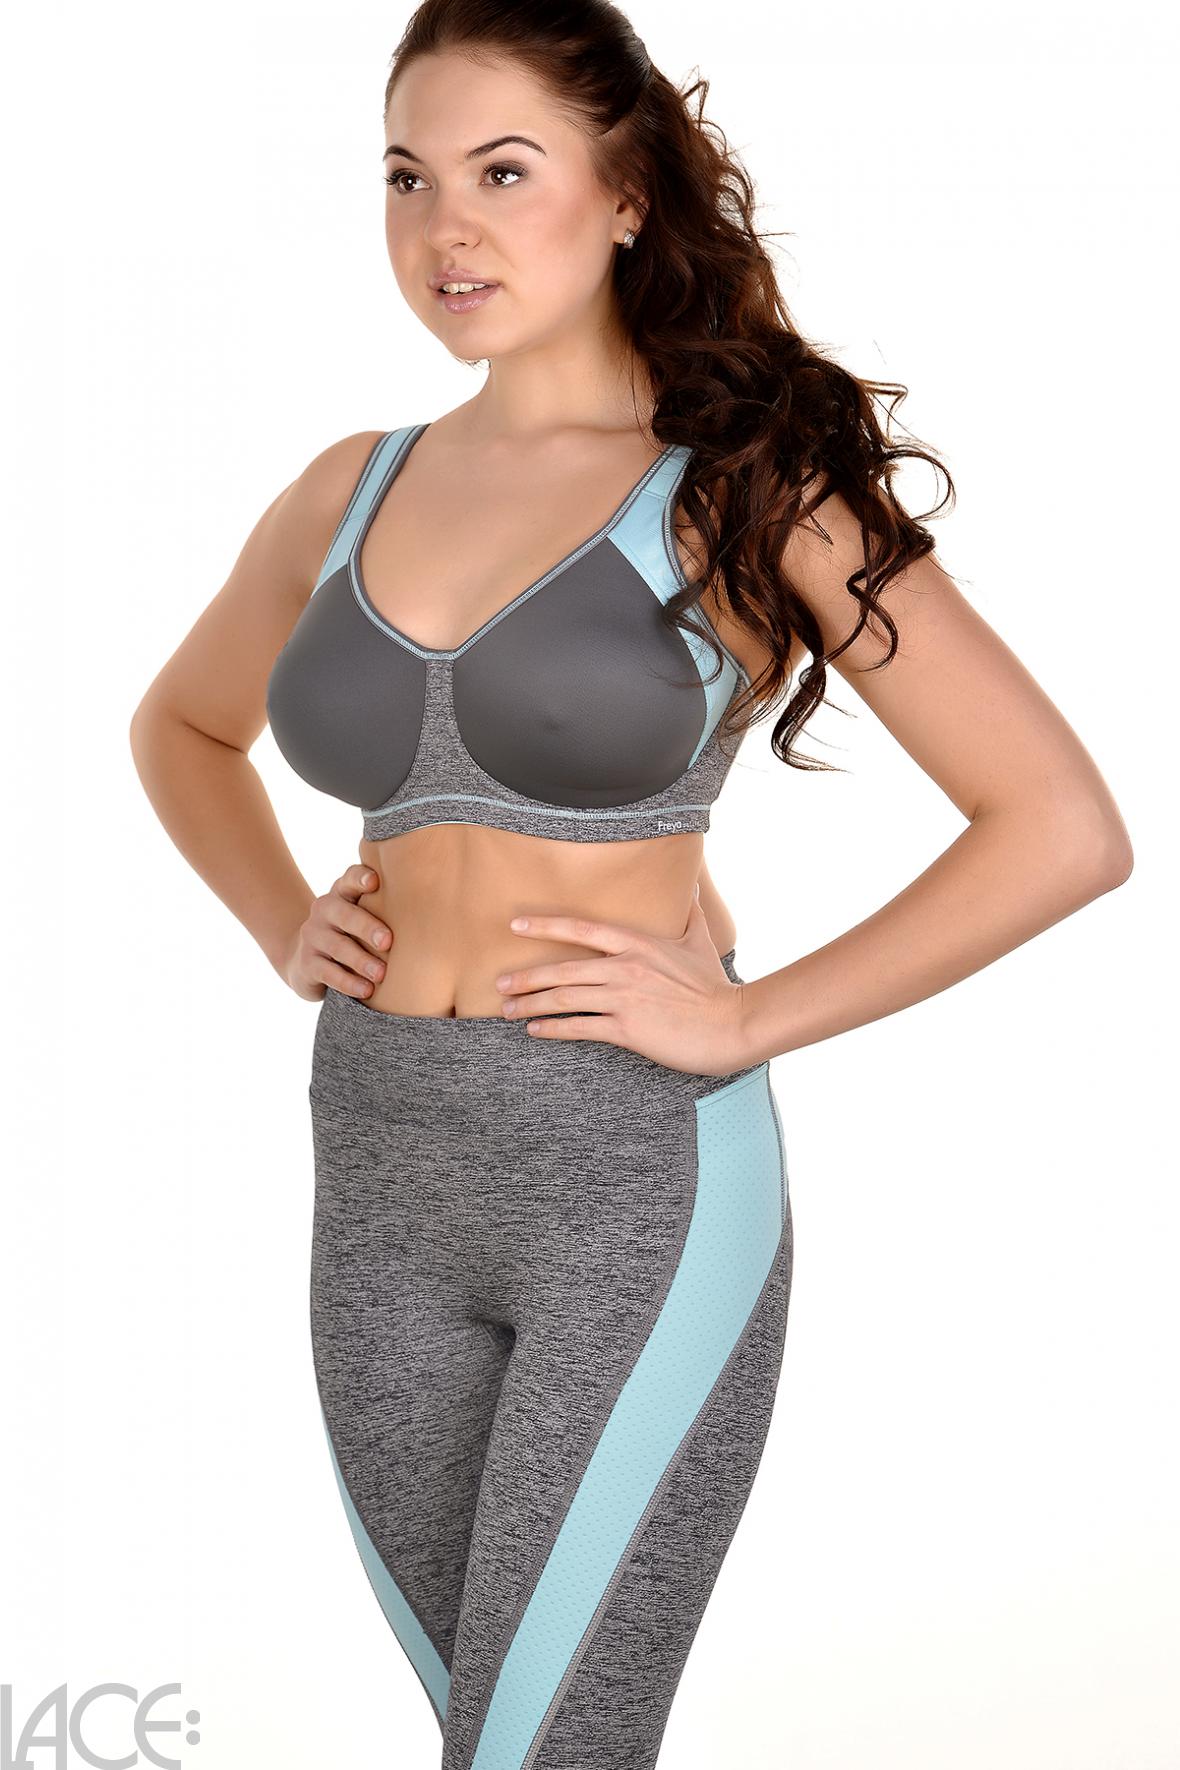 Freya Lingerie Sonic Underwired Sports bra E-H cup CARBON – Lace-Lingerie .com